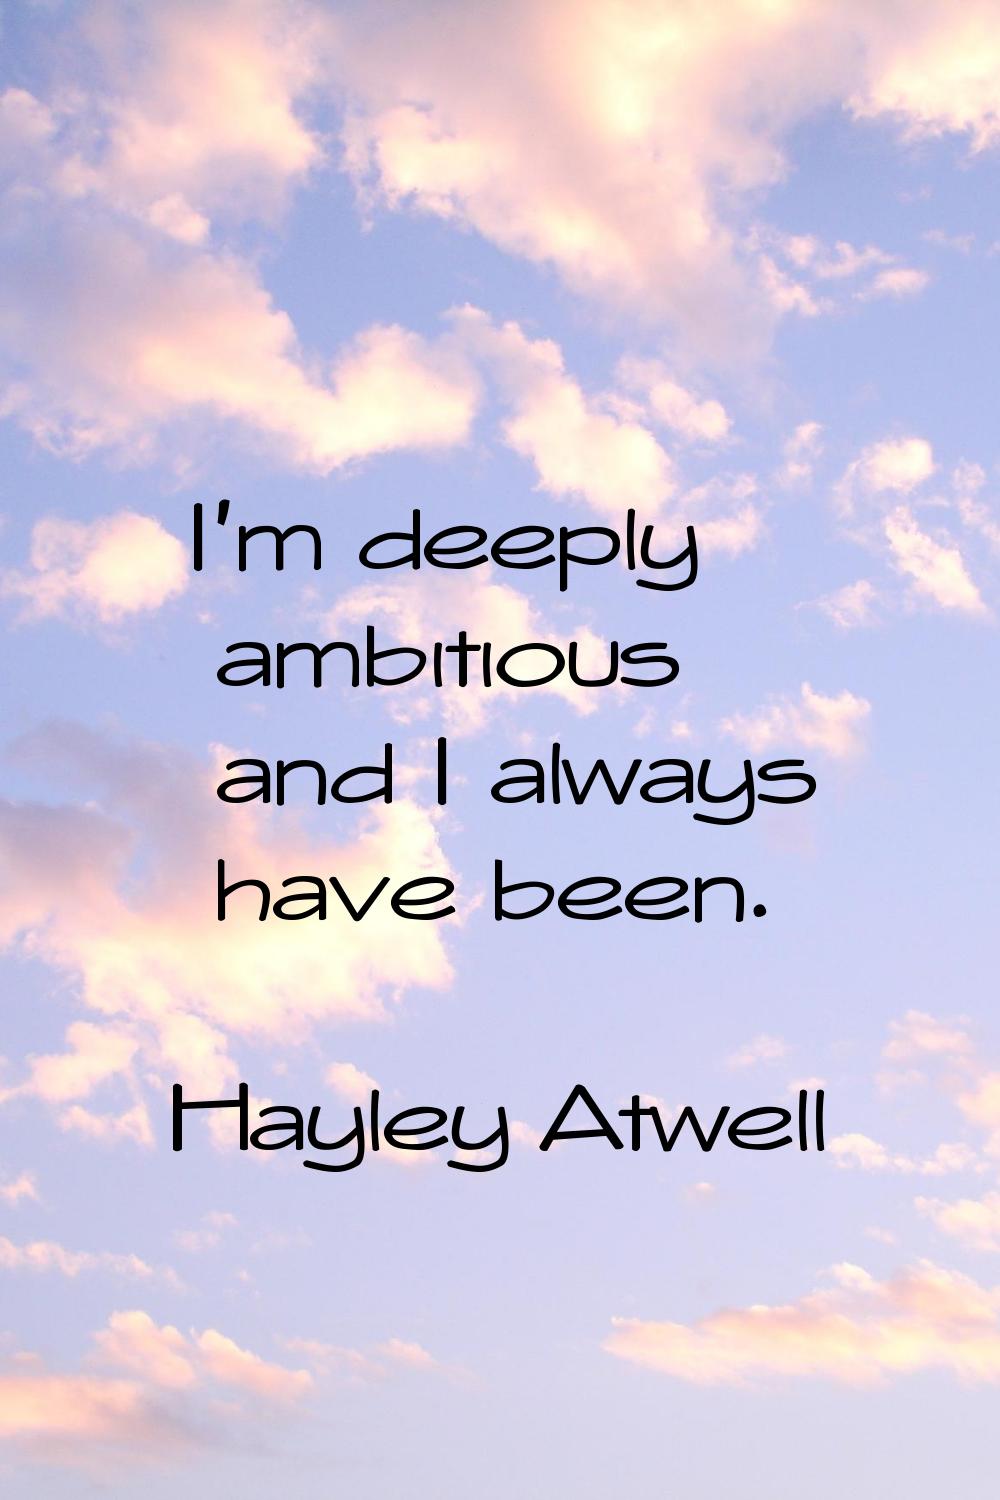 I'm deeply ambitious and I always have been.